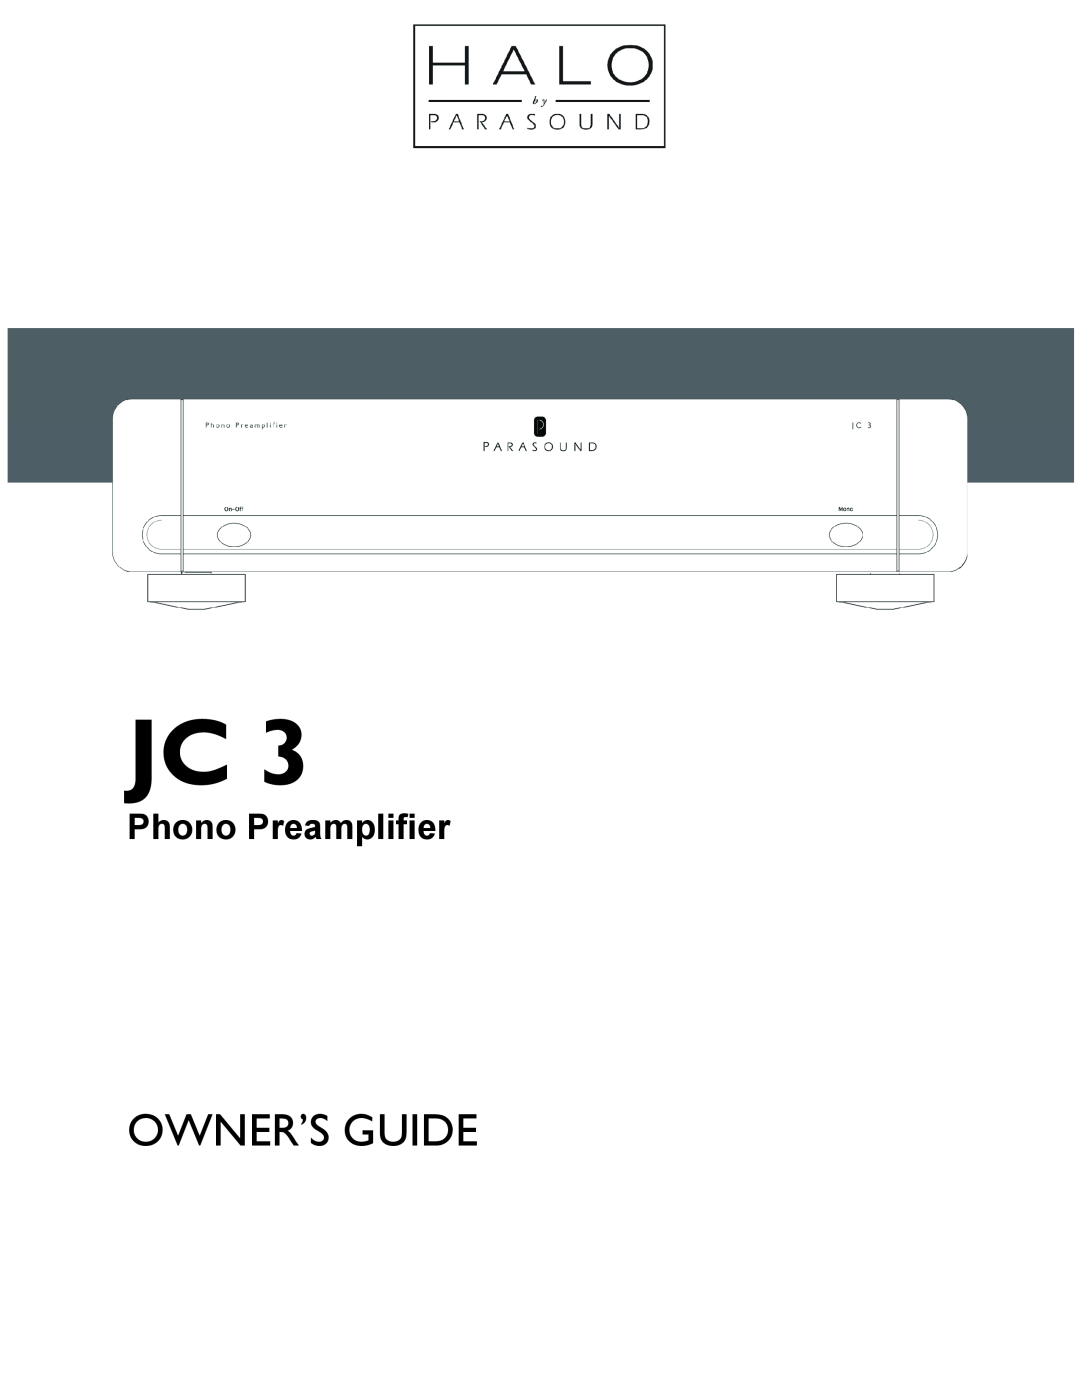 Parasound JC 3 manual Owner’S Guide, Phono Preamplifier 